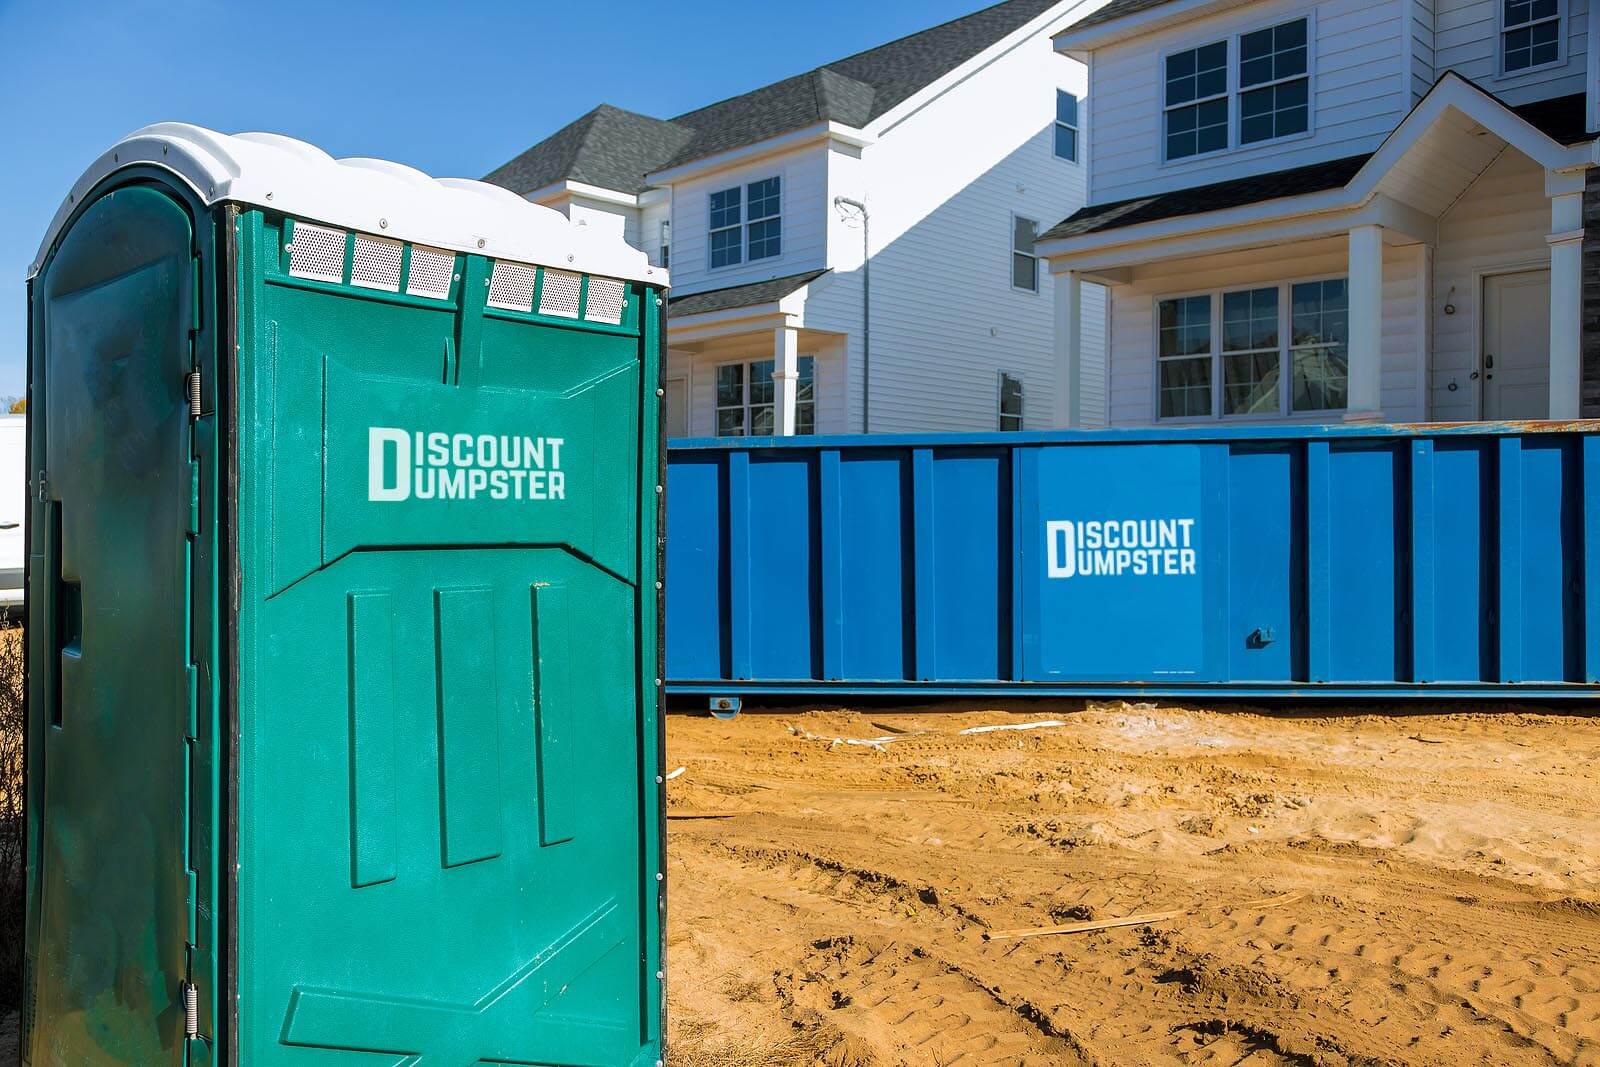 Discount dumpster has dumpsters of all sizes to manage the waste at your next home improvement proje Discount Dumpster Chicago (312)549-9198